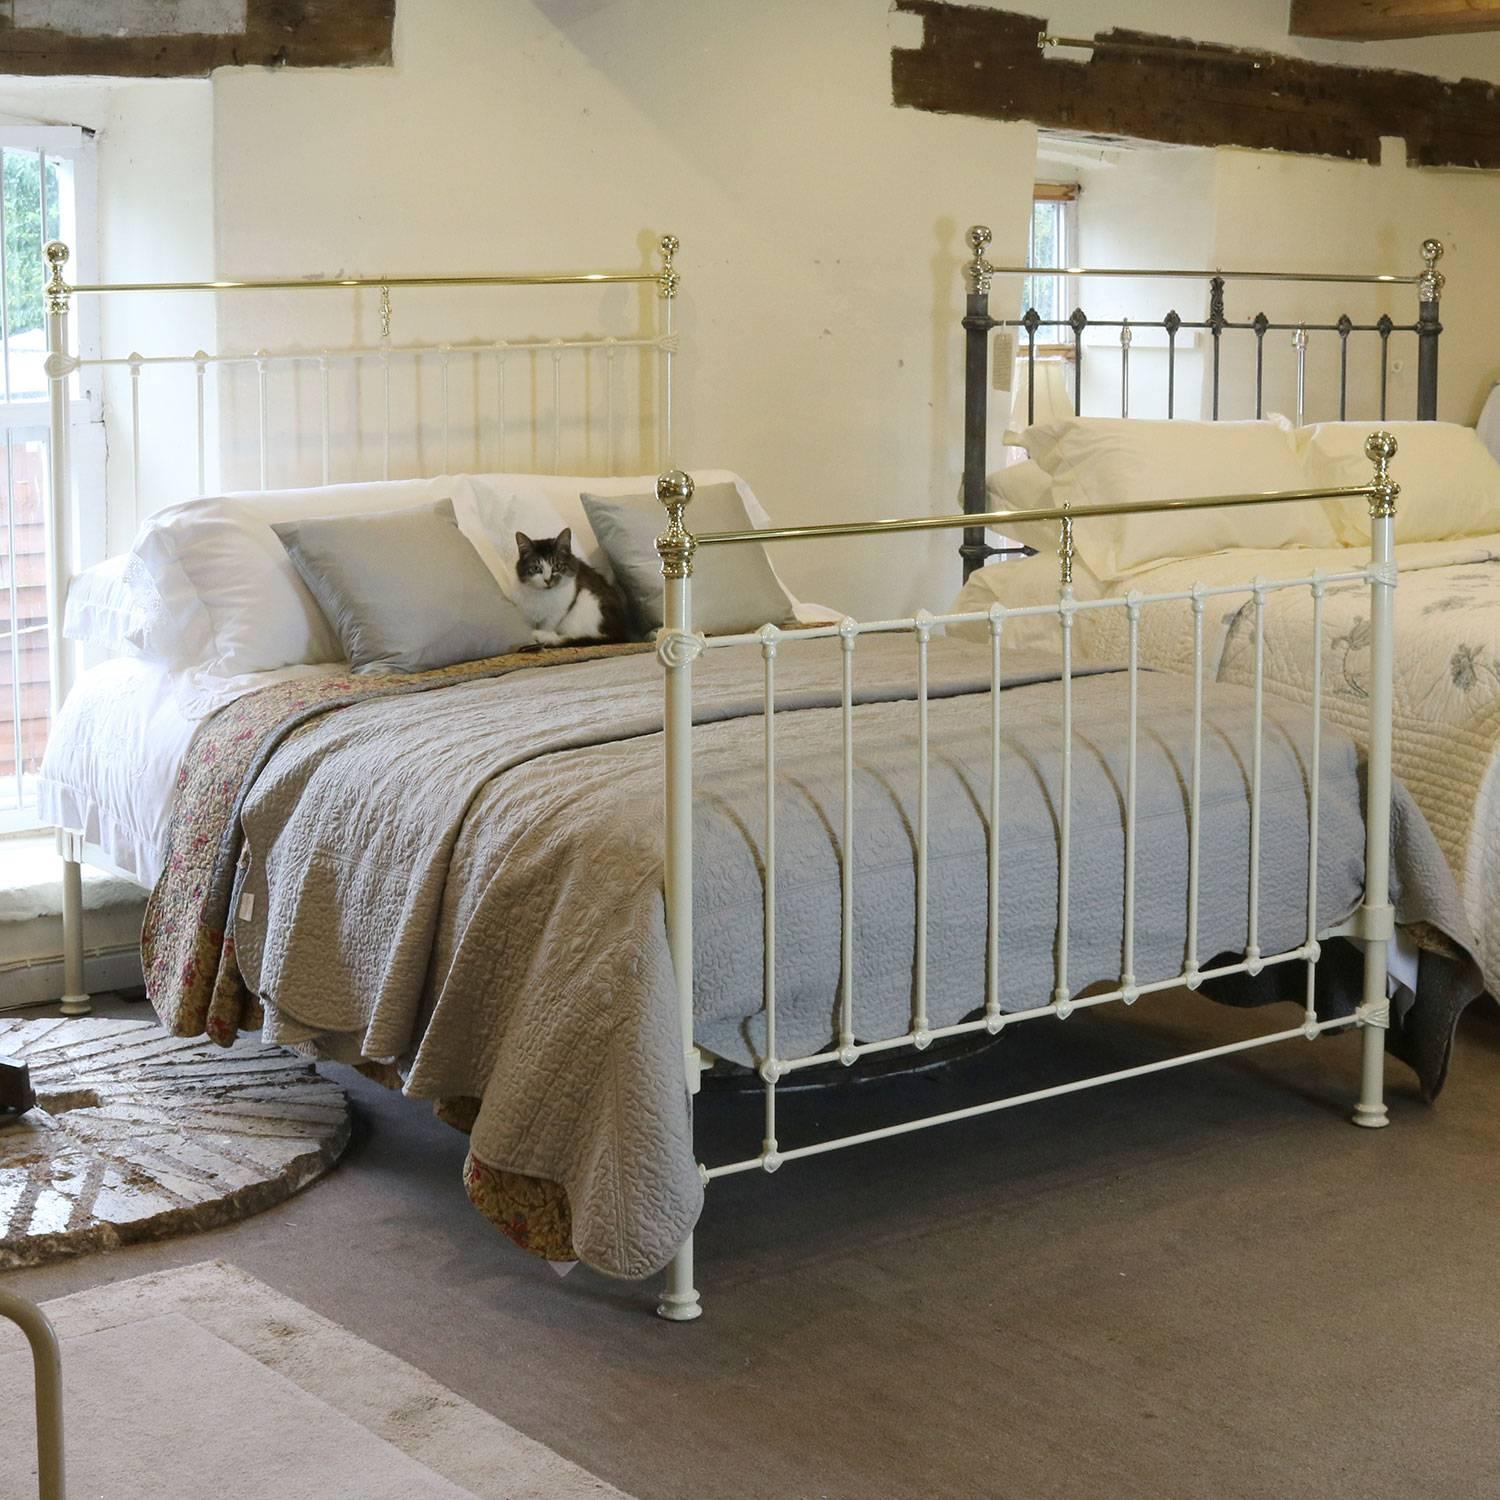 A fine brass and iron bed adapted from an original Victorian frame and finished in cream with straight brass top rails.

This bed accepts a British king-size or American queen-size (60 inches, 5ft or 150cm) base and mattress.

The price is for